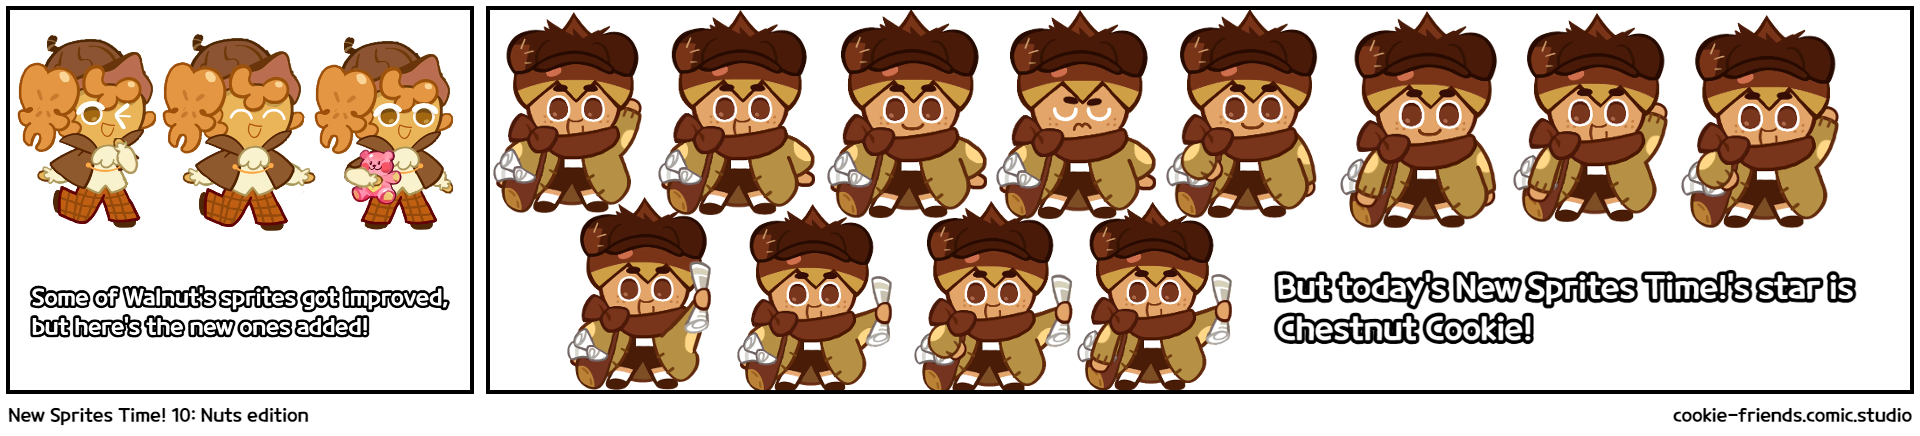 New Sprites Time! 10: Nuts edition